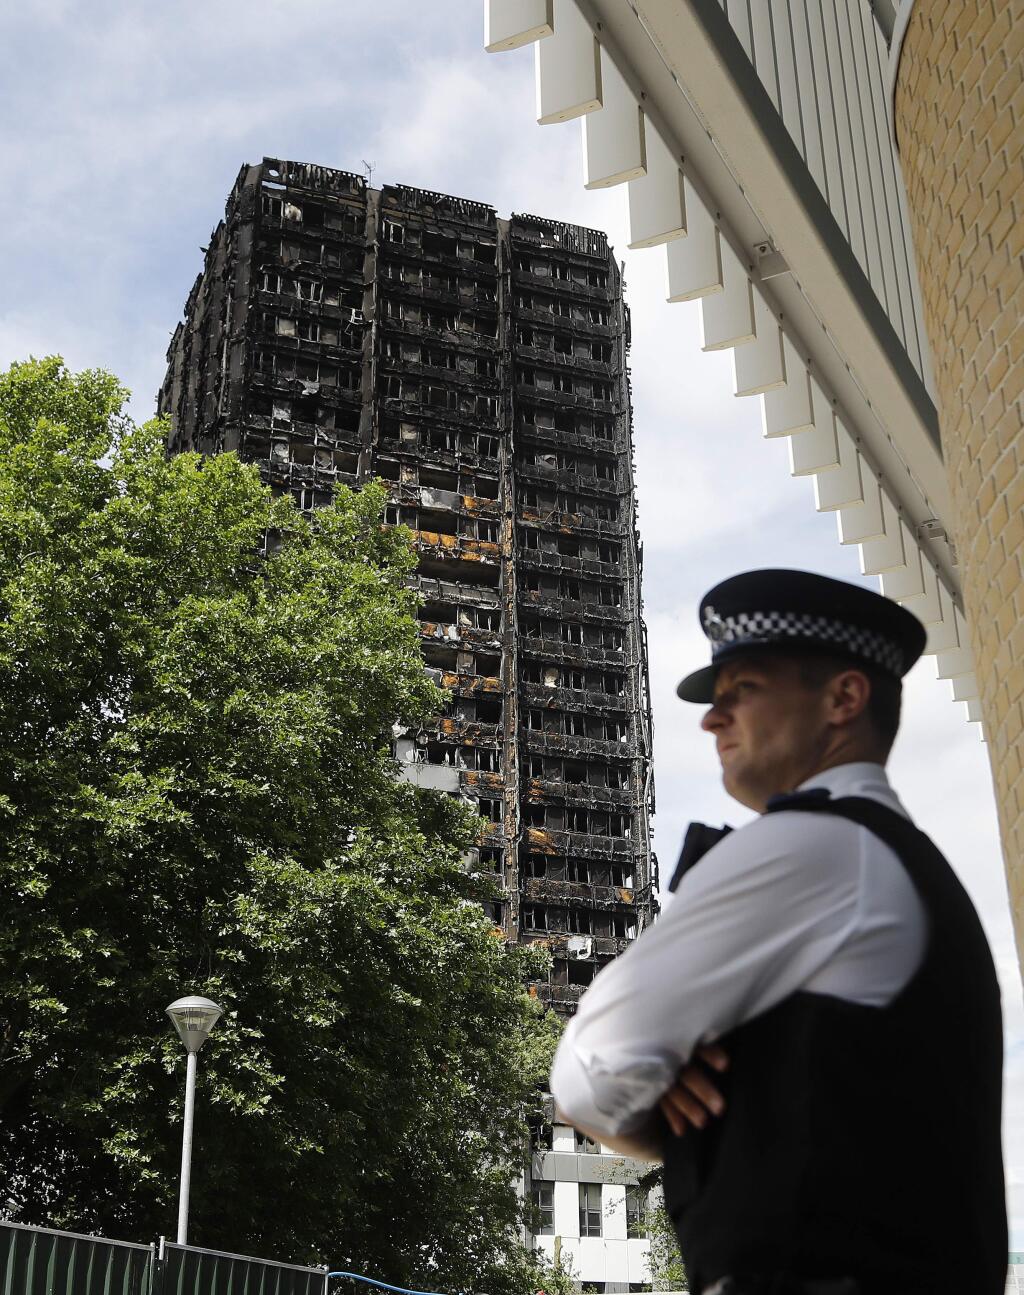 A police officer stands near to the burnt Grenfell Tower apartment building standing testament to the recent fire in London, Friday, June 23, 2017. British officials have ordered an immediate examination Friday, into a fridge-freezer that is deemed to have started the fire in the 24-storey high-rise apartment building early morning of June 14th, and the outside cladding of the building which is thought to have helped spread the fire, according to police, leaving dozens dead.(AP Photo/Frank Augstein)